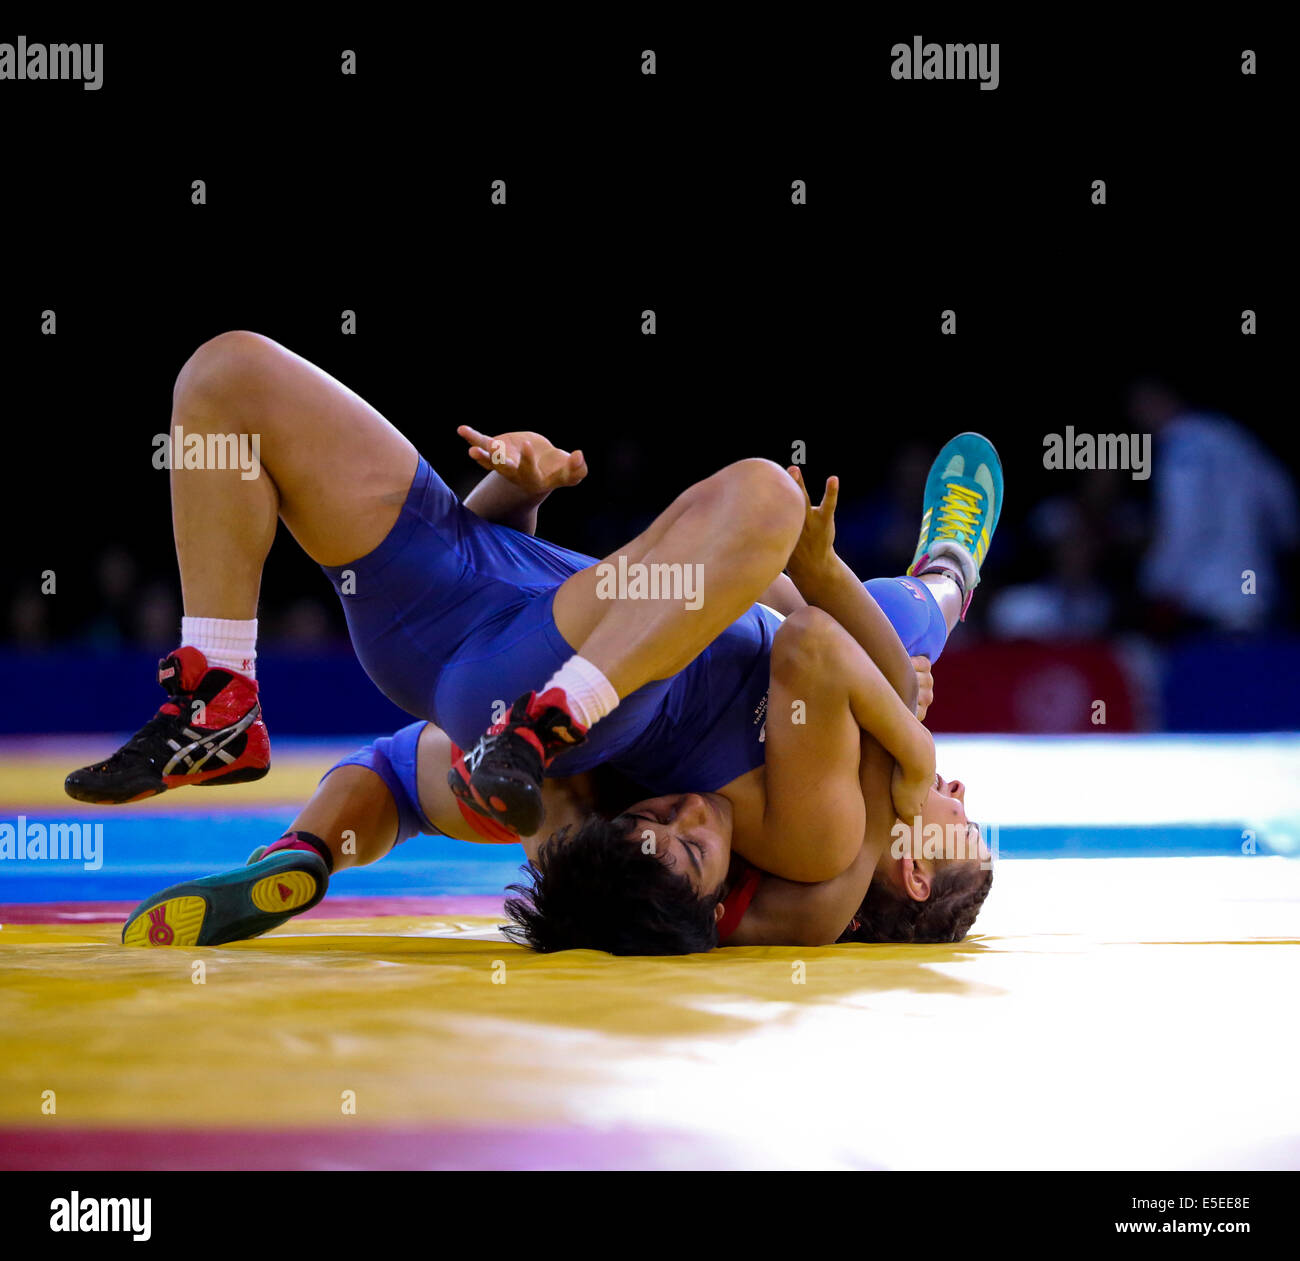 SECC Glasgow Scotland 29 Jul 2014. Commonwealth Games day 6. Men's and Women's wrestling rounds. Vinesh IND takes gold over Yana Rattigan ENG Credit:  ALAN OLIVER/Alamy Live News Stock Photo